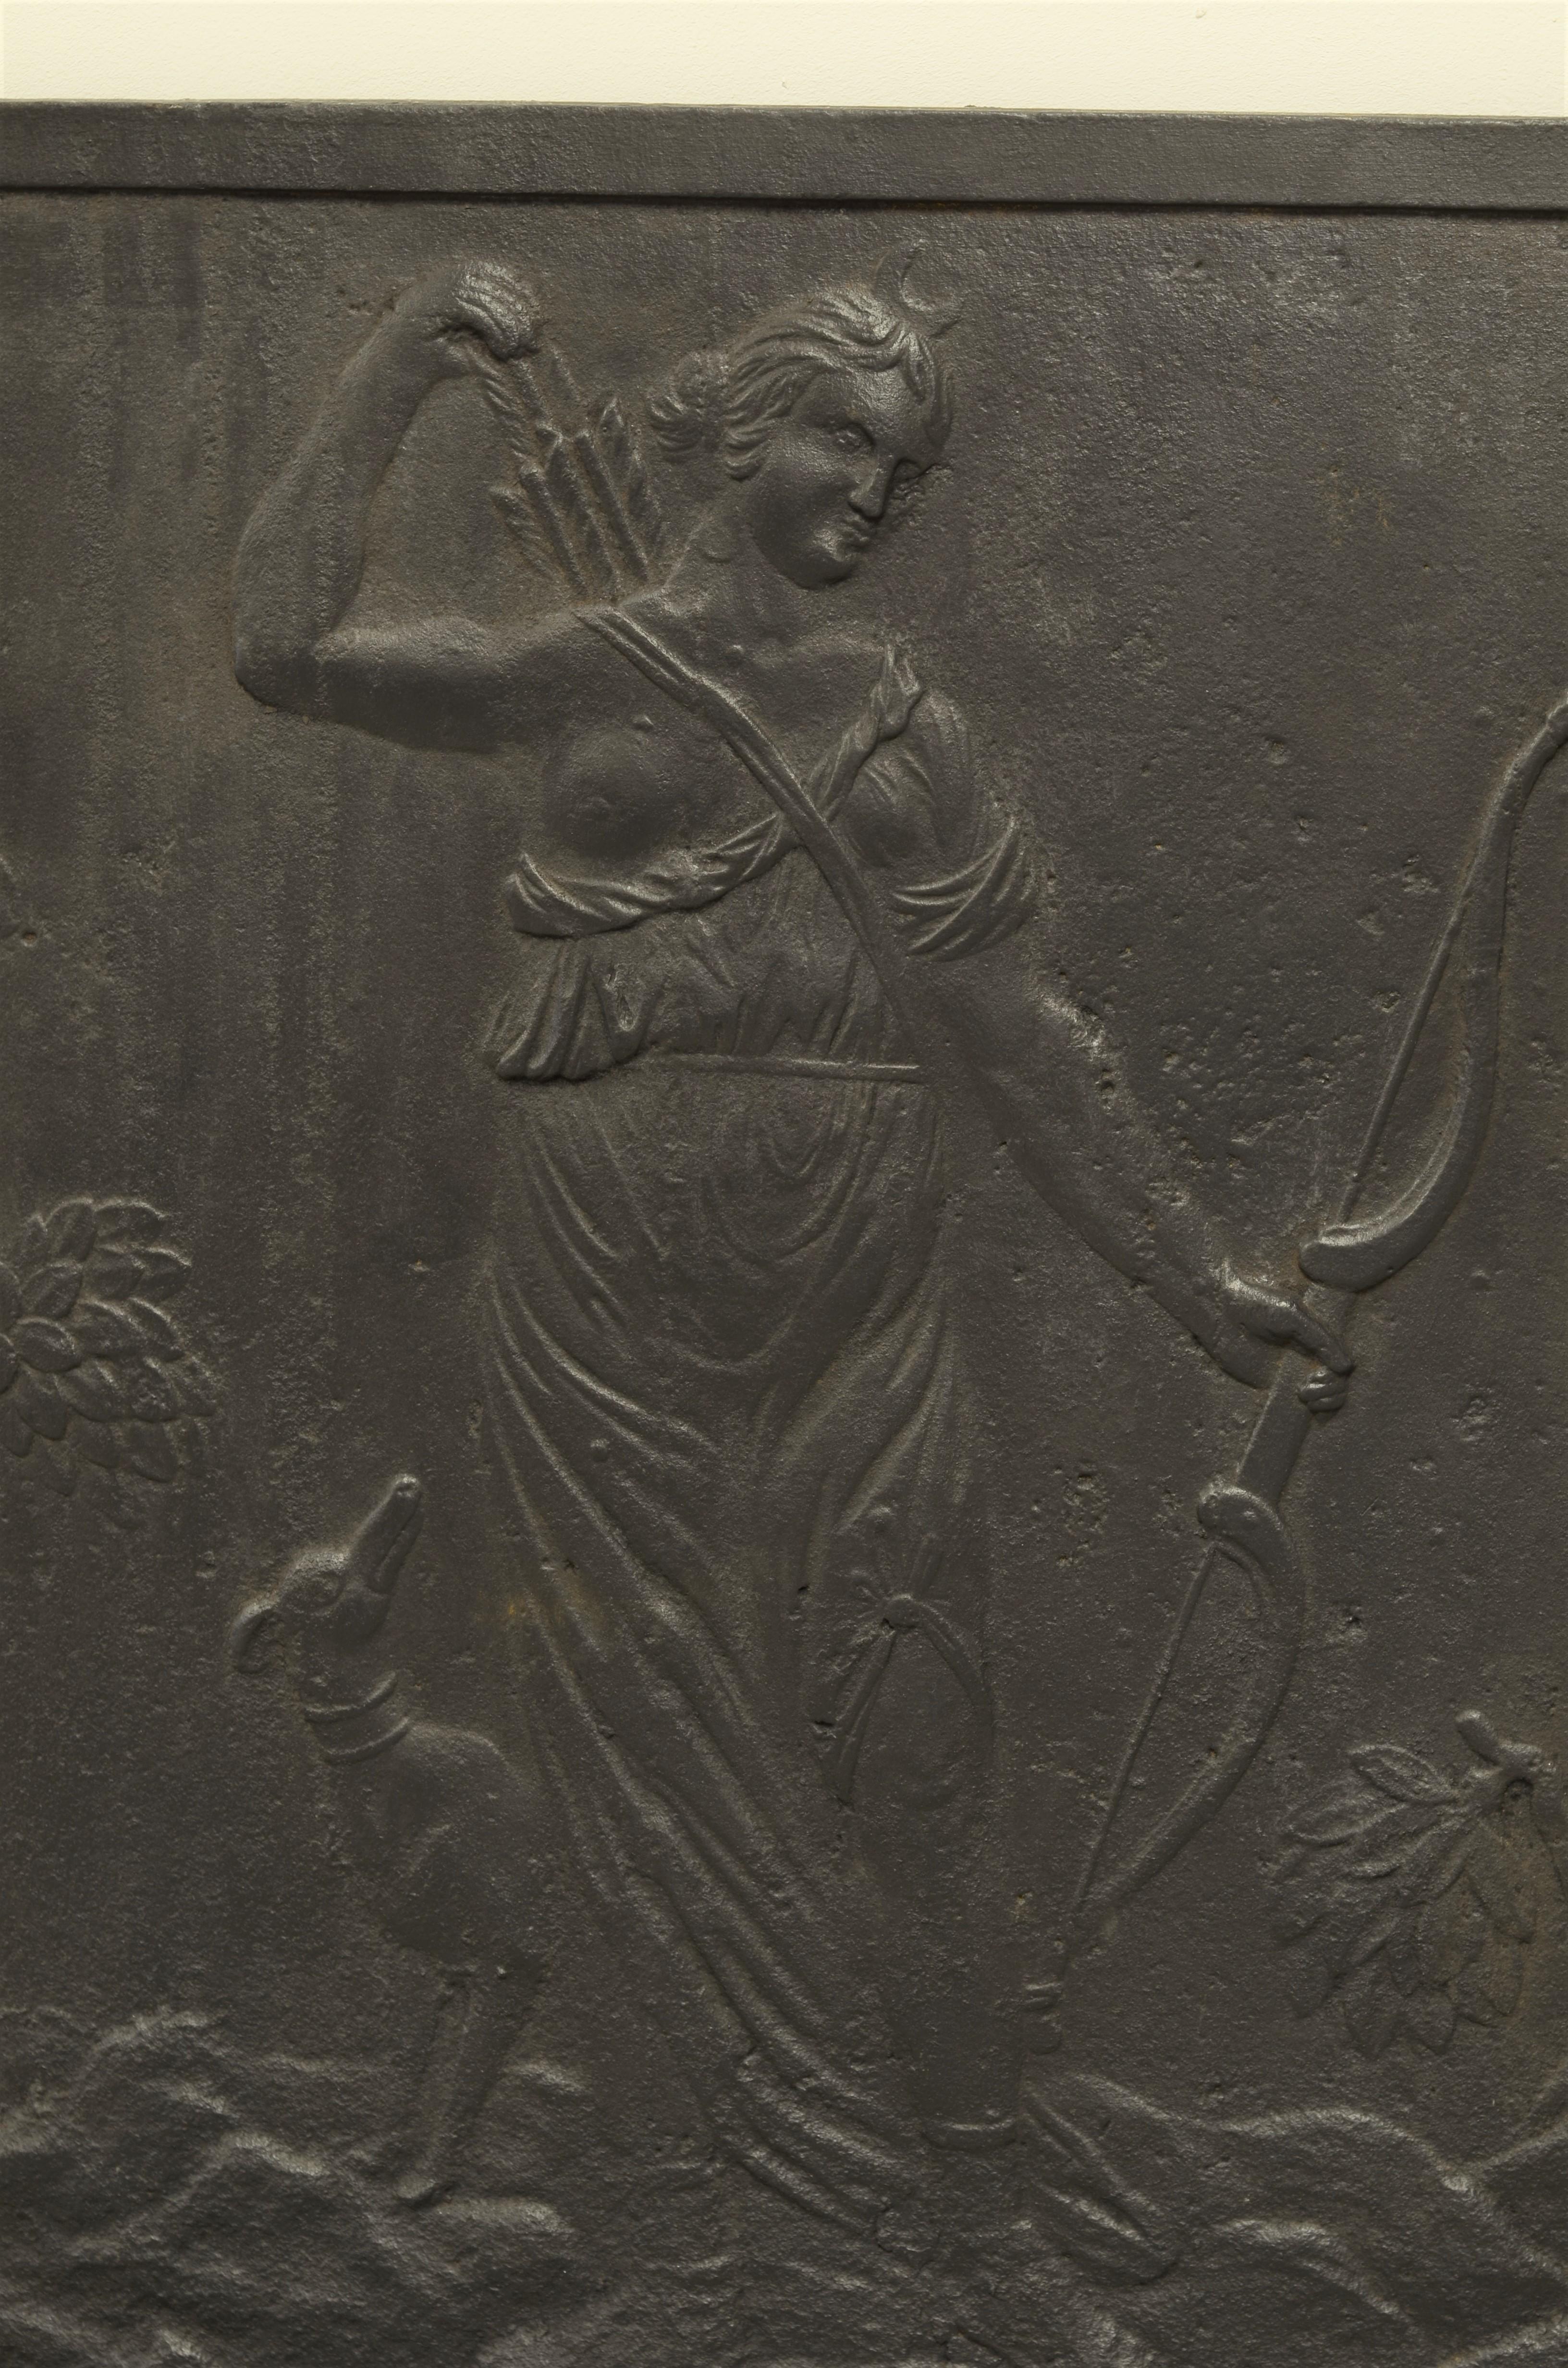 This beautiful and square antique cast- iron fireback shows the goddes Dianna.
She is a Roman goddess of the hunt, the Moon, and nature. 

Great condition, can be used in fire or as a impressive backsplash.

Sold by Schermerhorn Antique